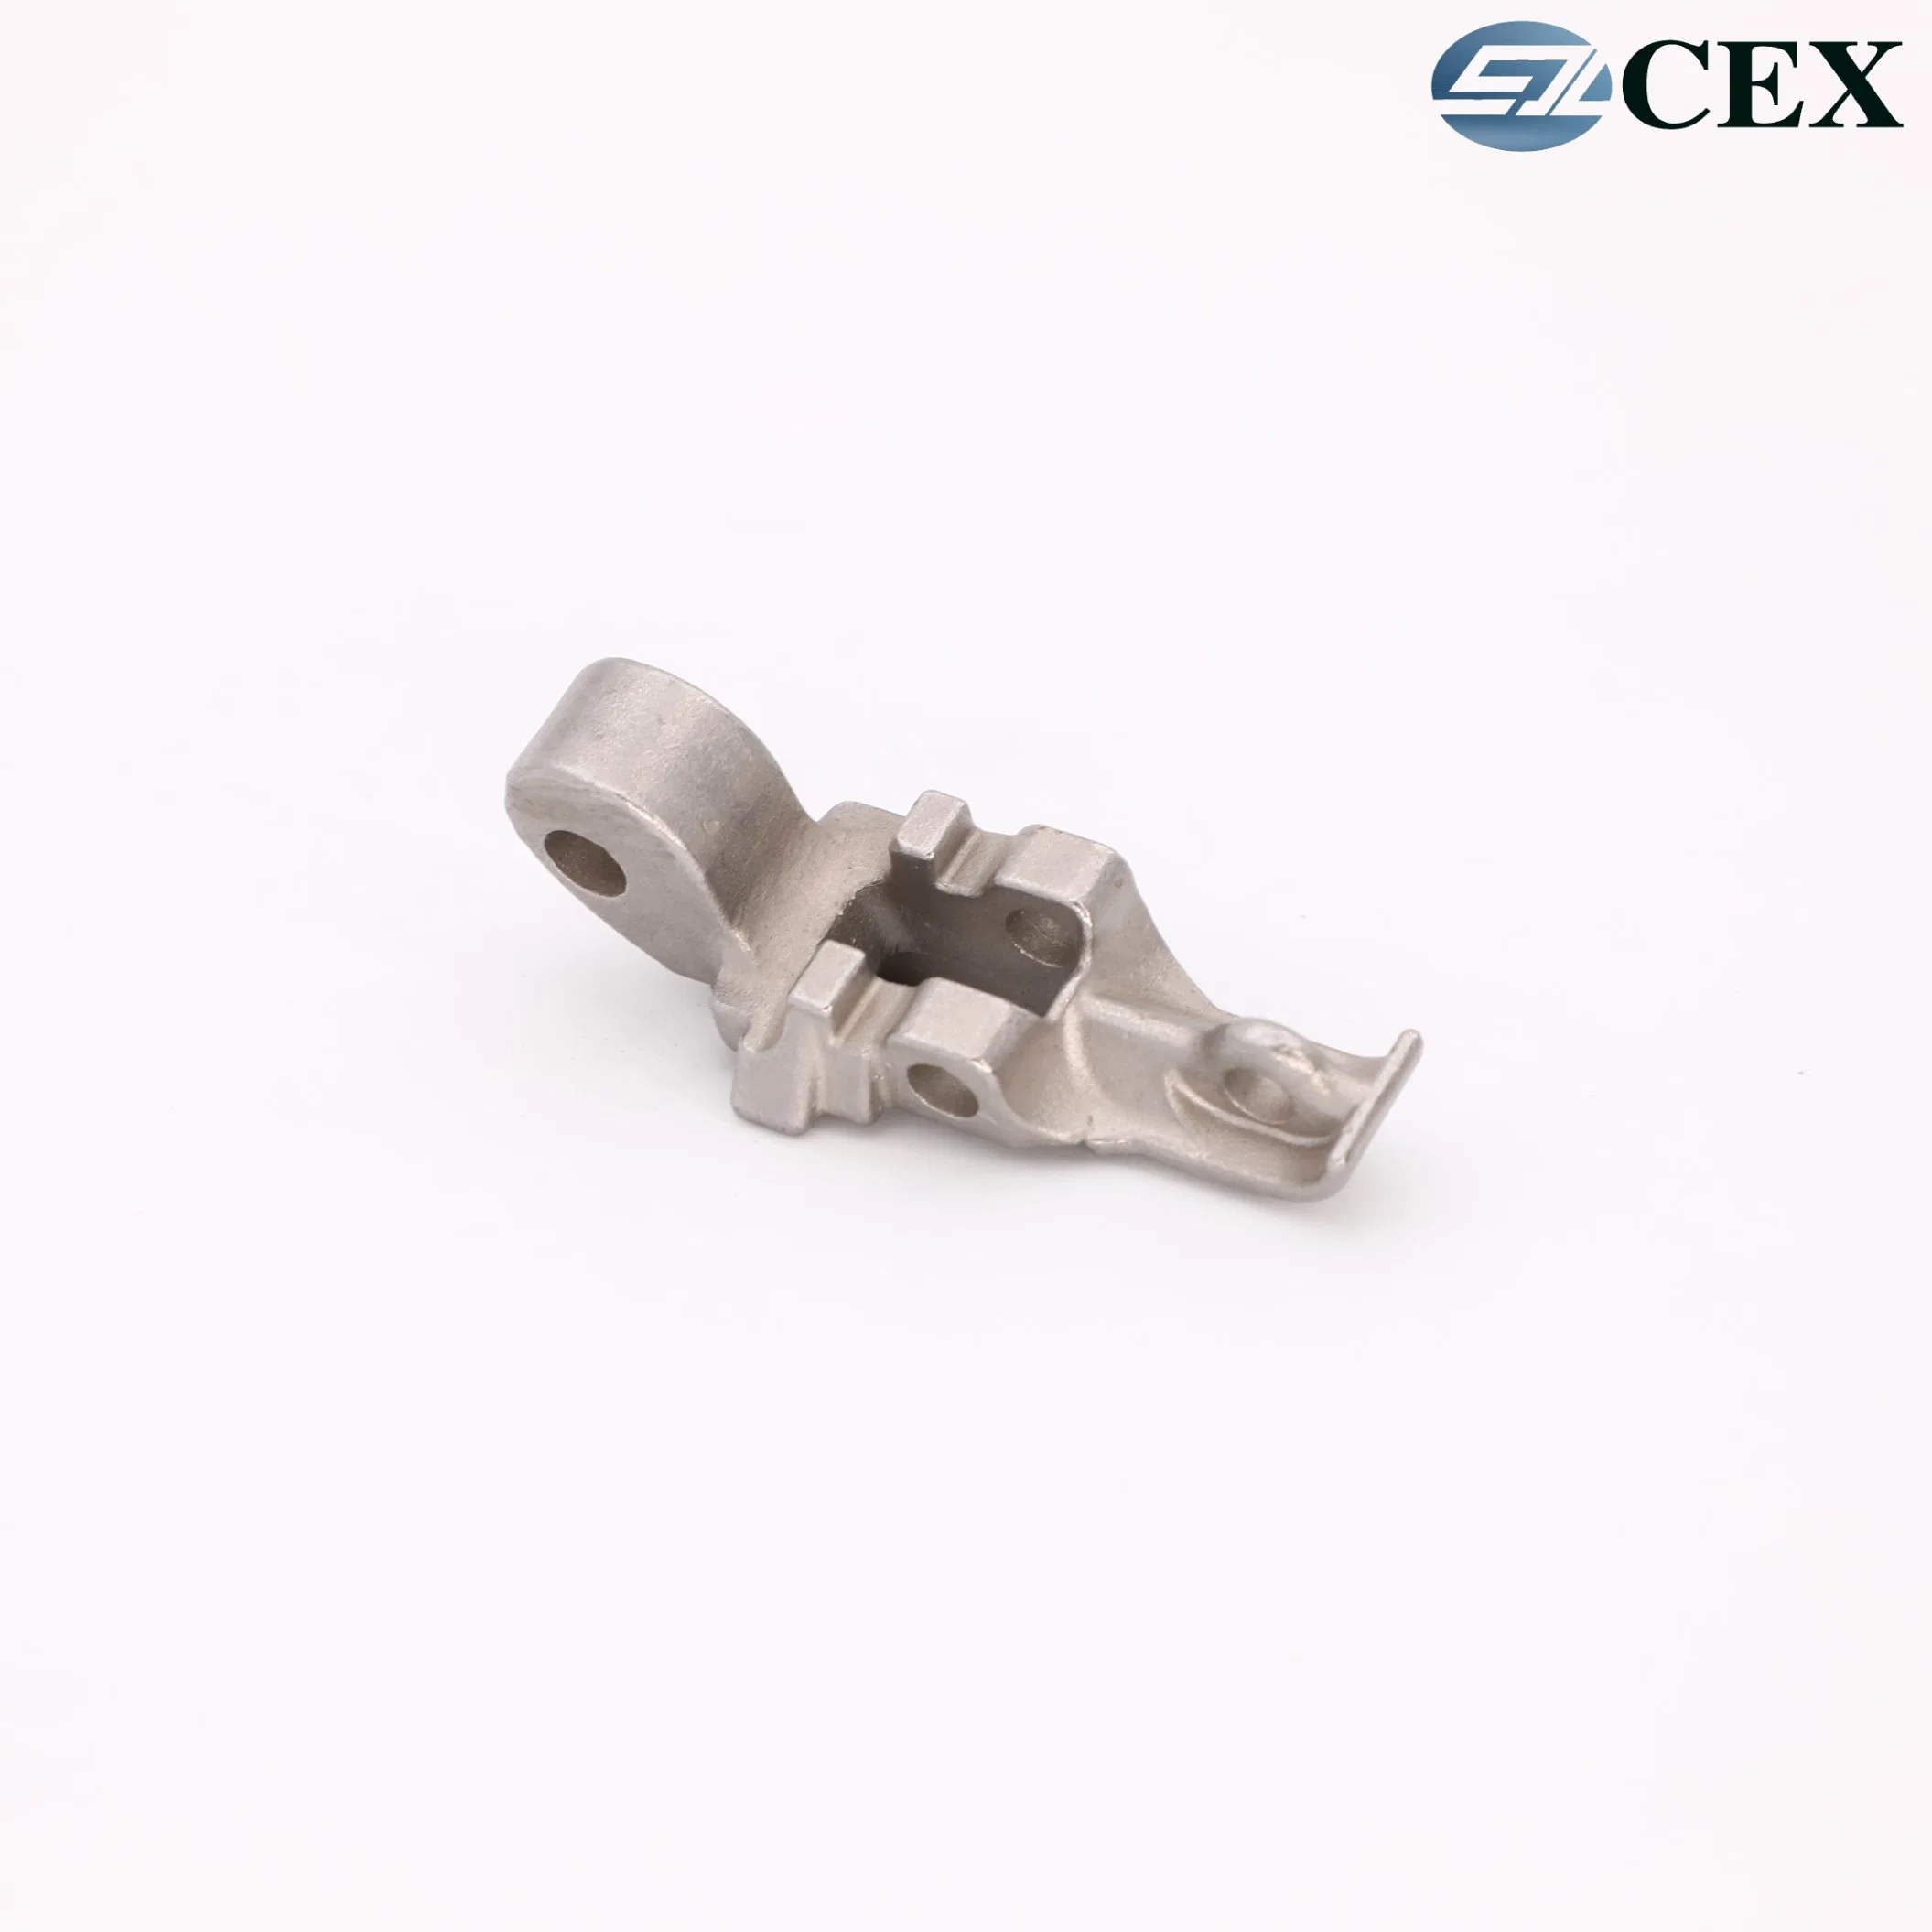 A356-T6 Aluminum Alloy Light Weight High Precision Die Casting Bicycle Accessories